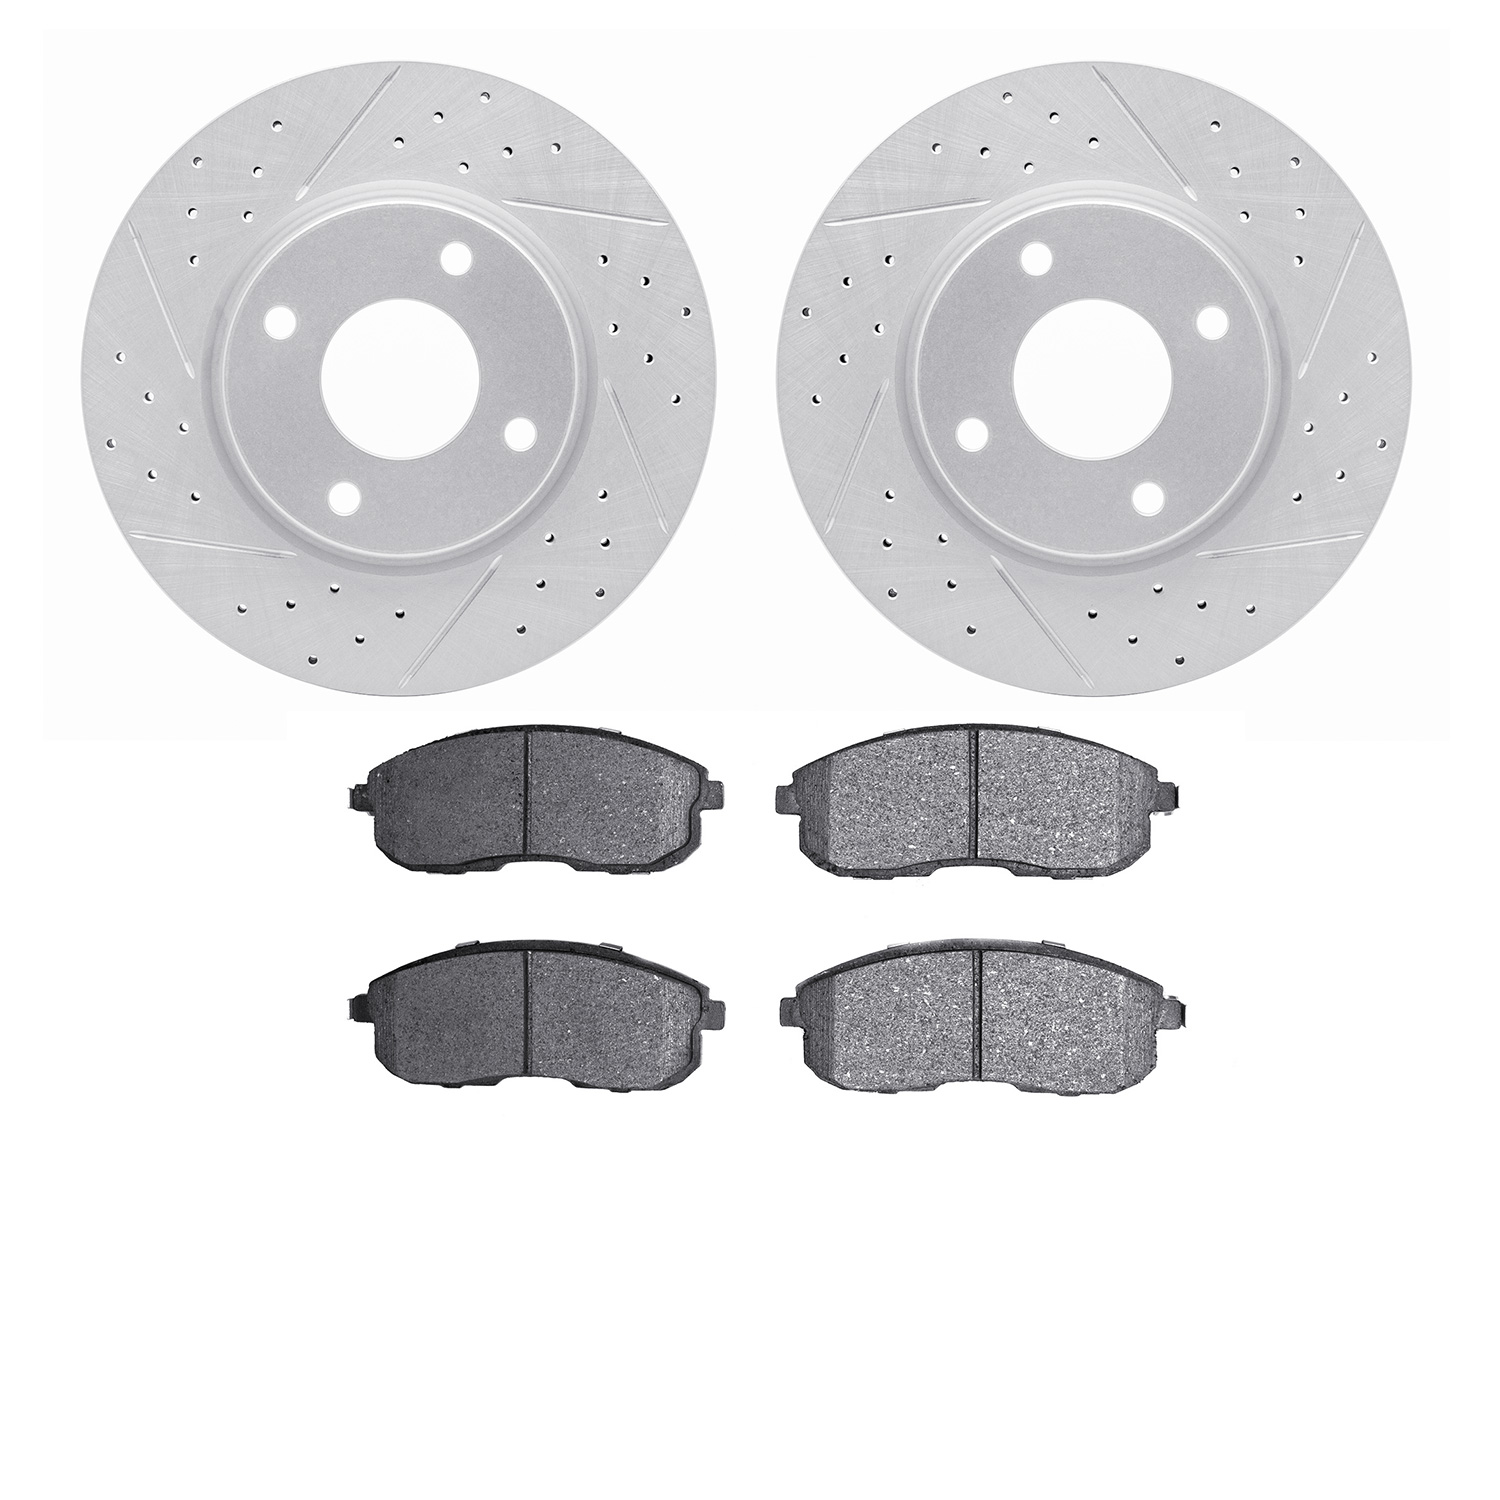 2502-67025 Geoperformance Drilled/Slotted Rotors w/5000 Advanced Brake Pads Kit, 2007-2014 Infiniti/Nissan, Position: Front